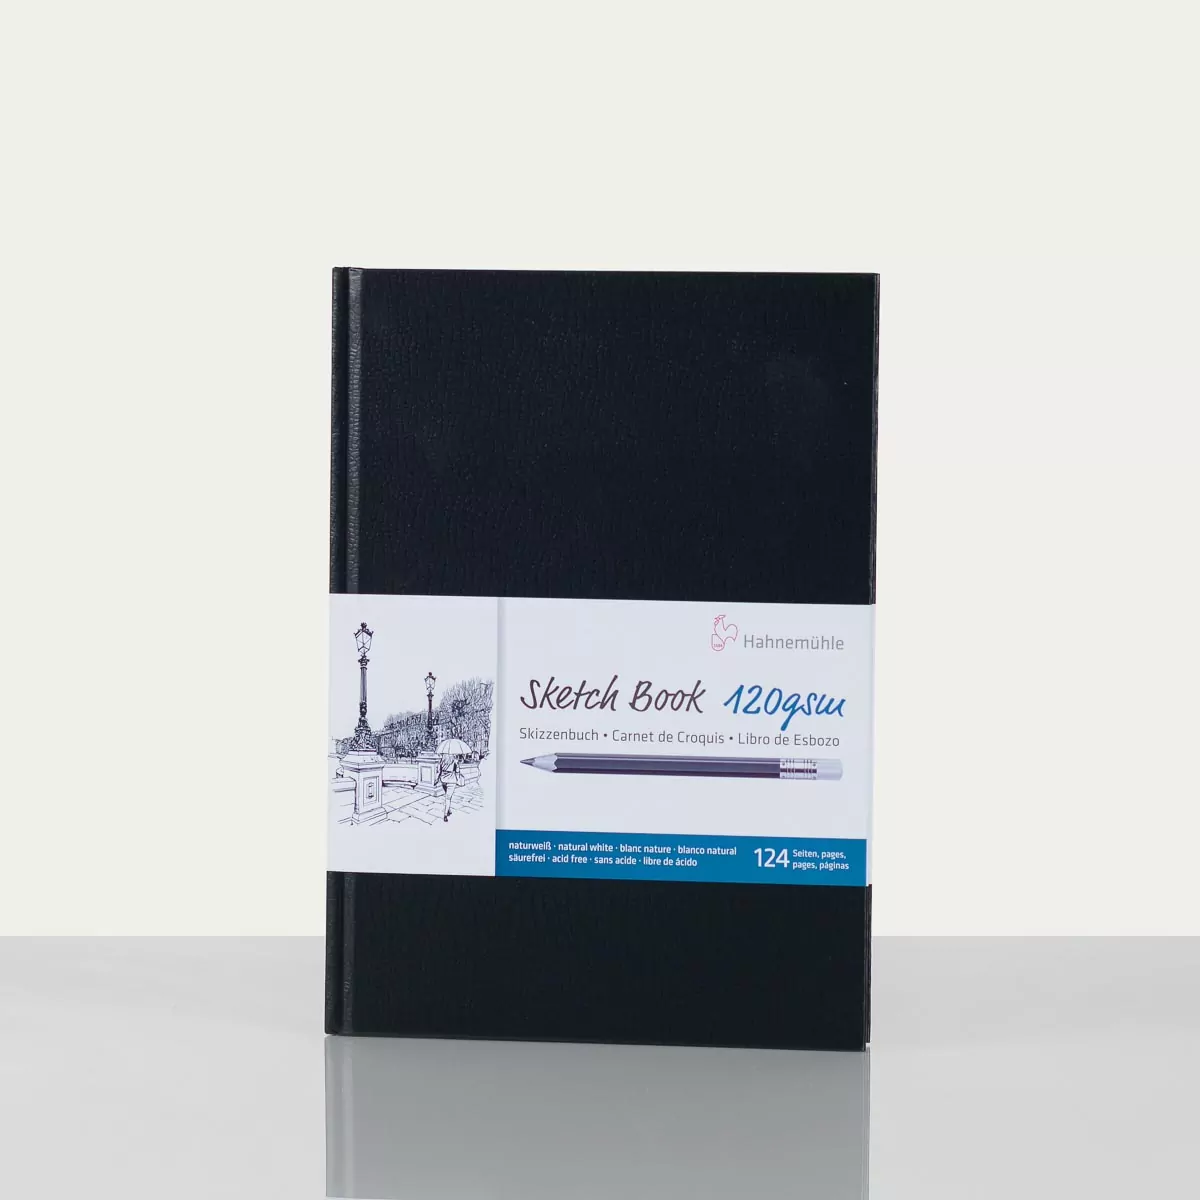 Traditional Hahnemuhle SketchBook * 120gsm DIN A3 62 Sheets